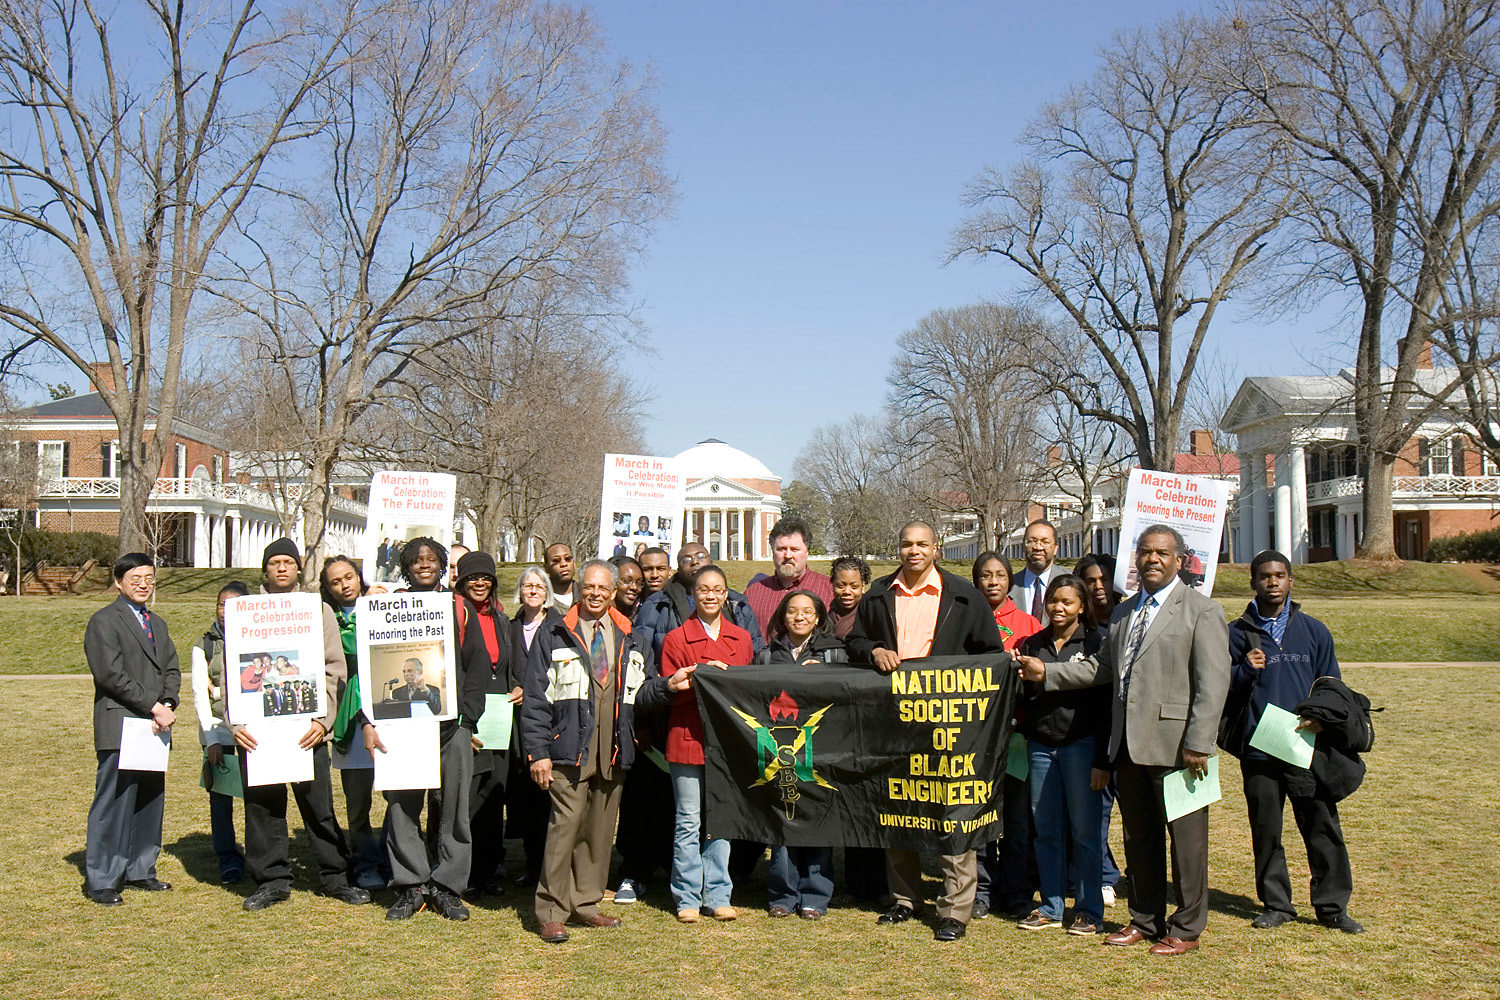 Group photo with a banner that reads: National Society of Black Engineers